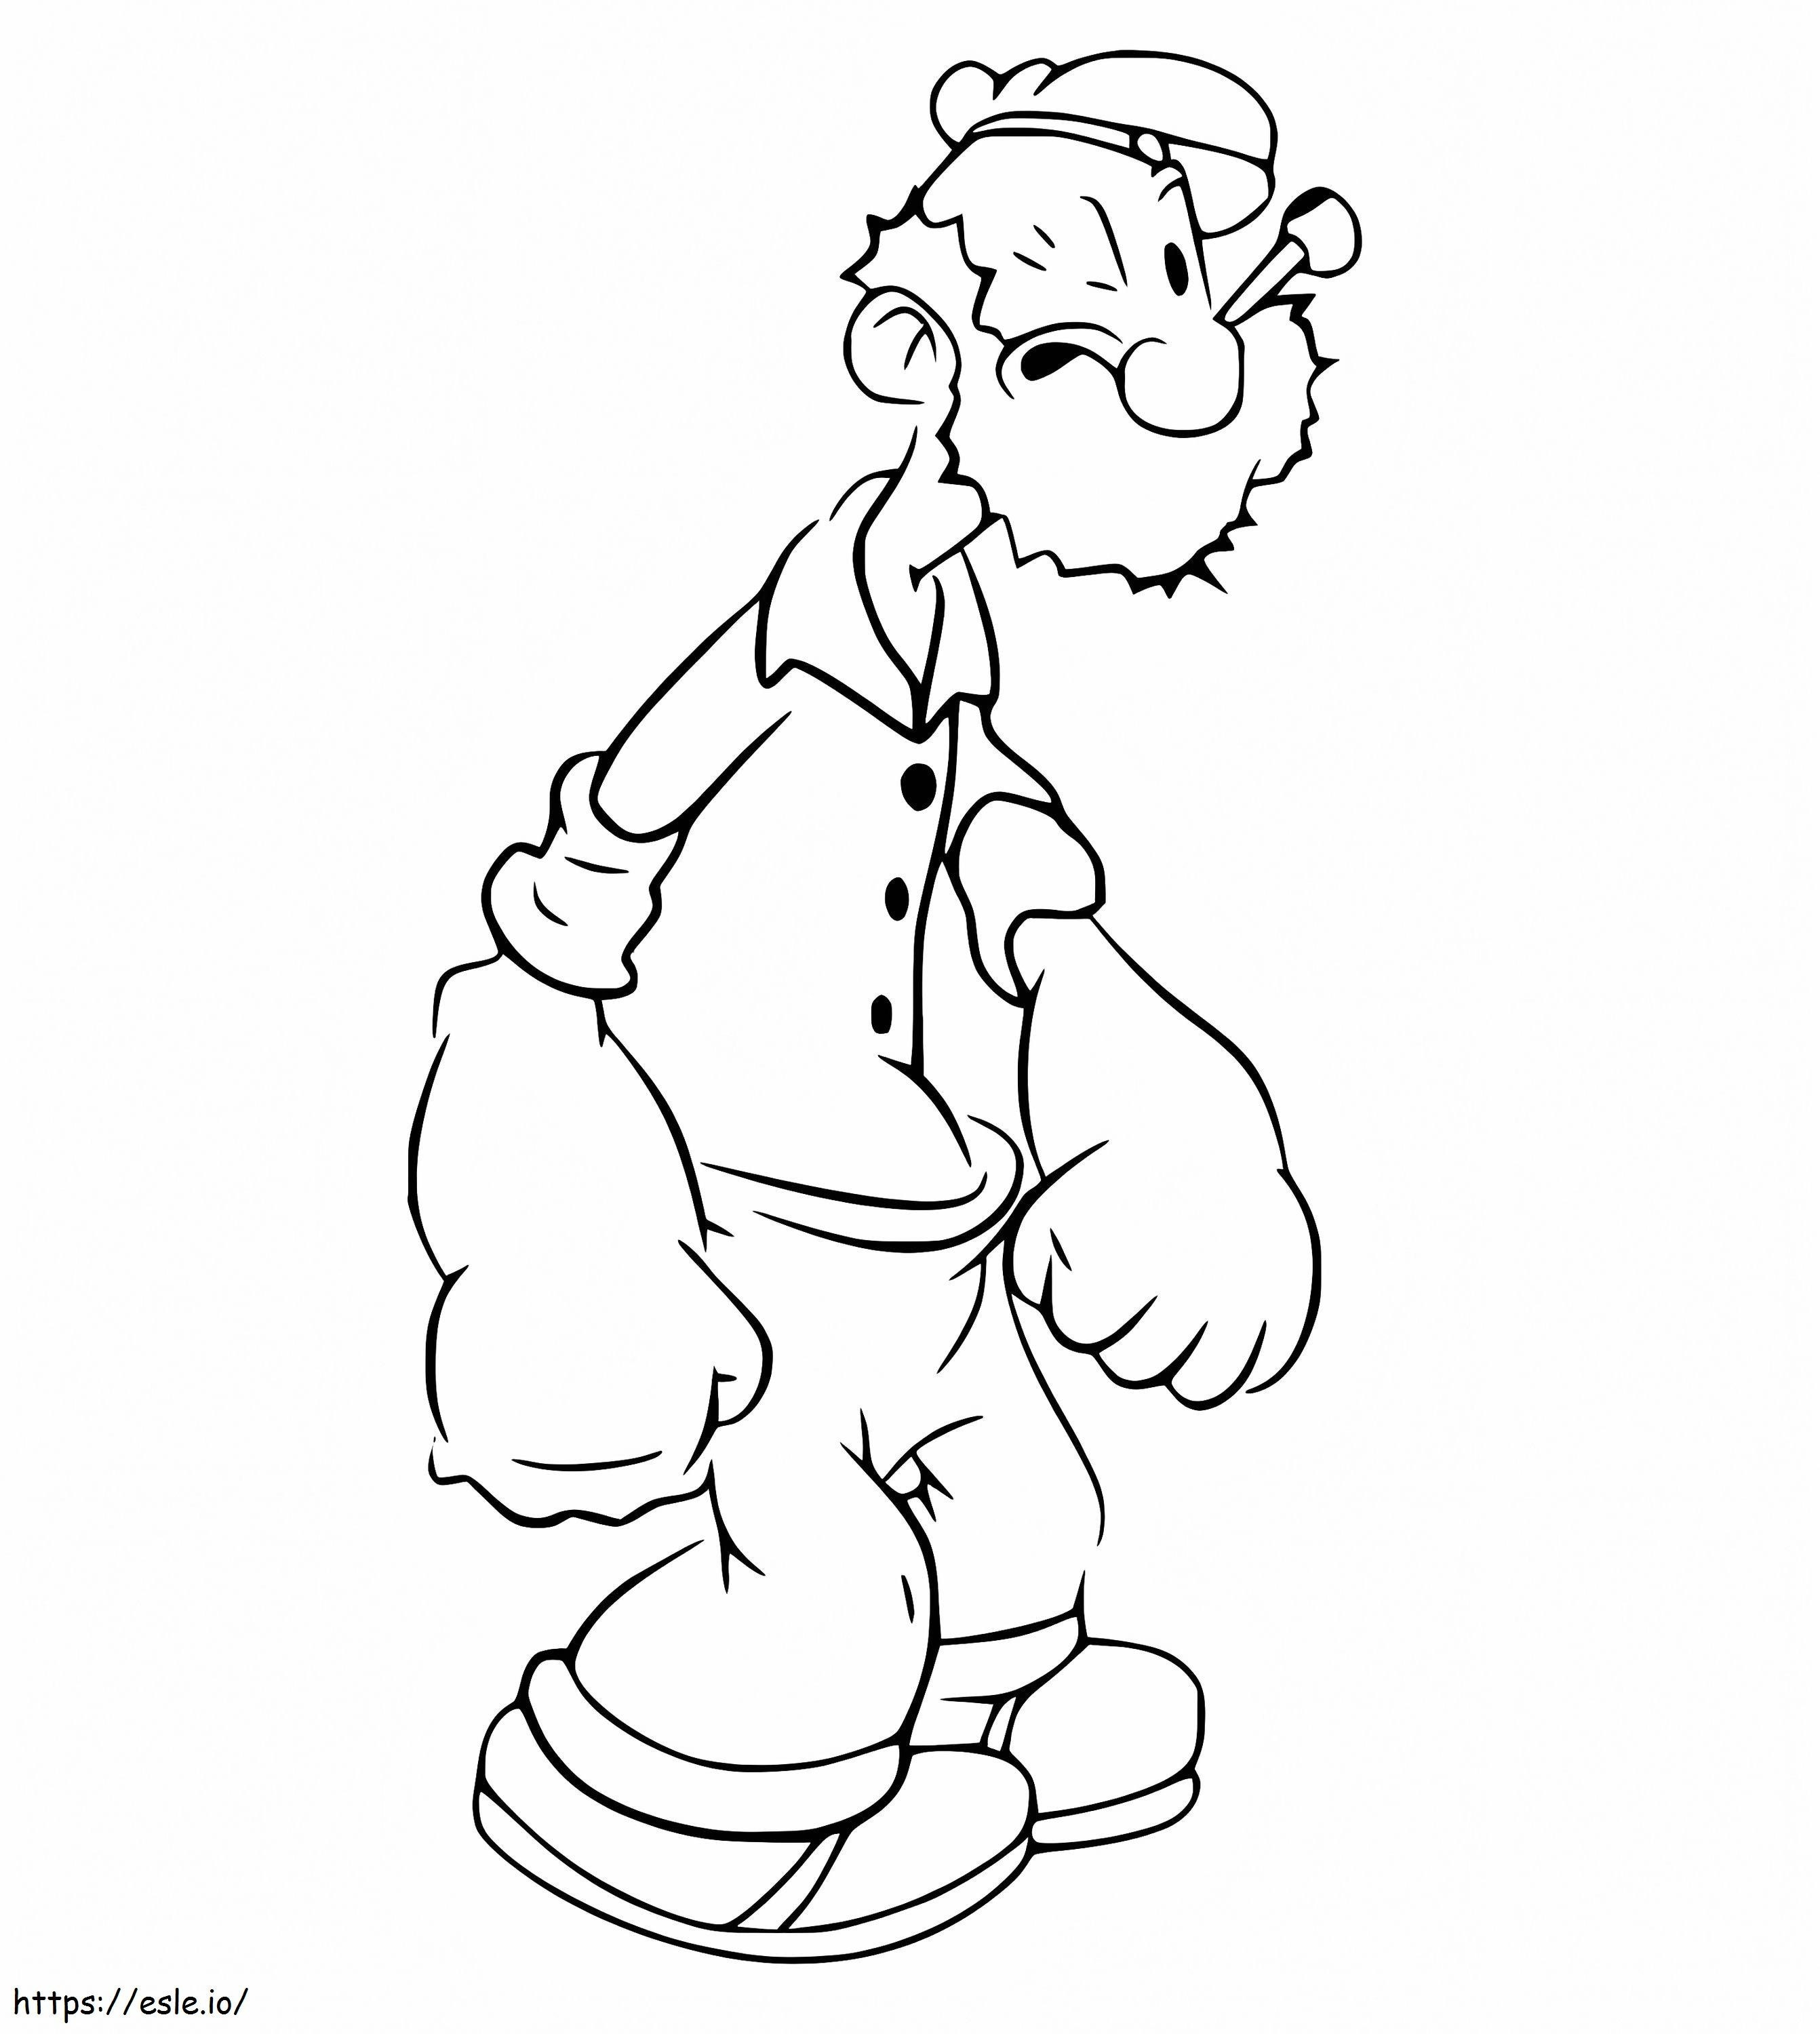 Old Popeye coloring page